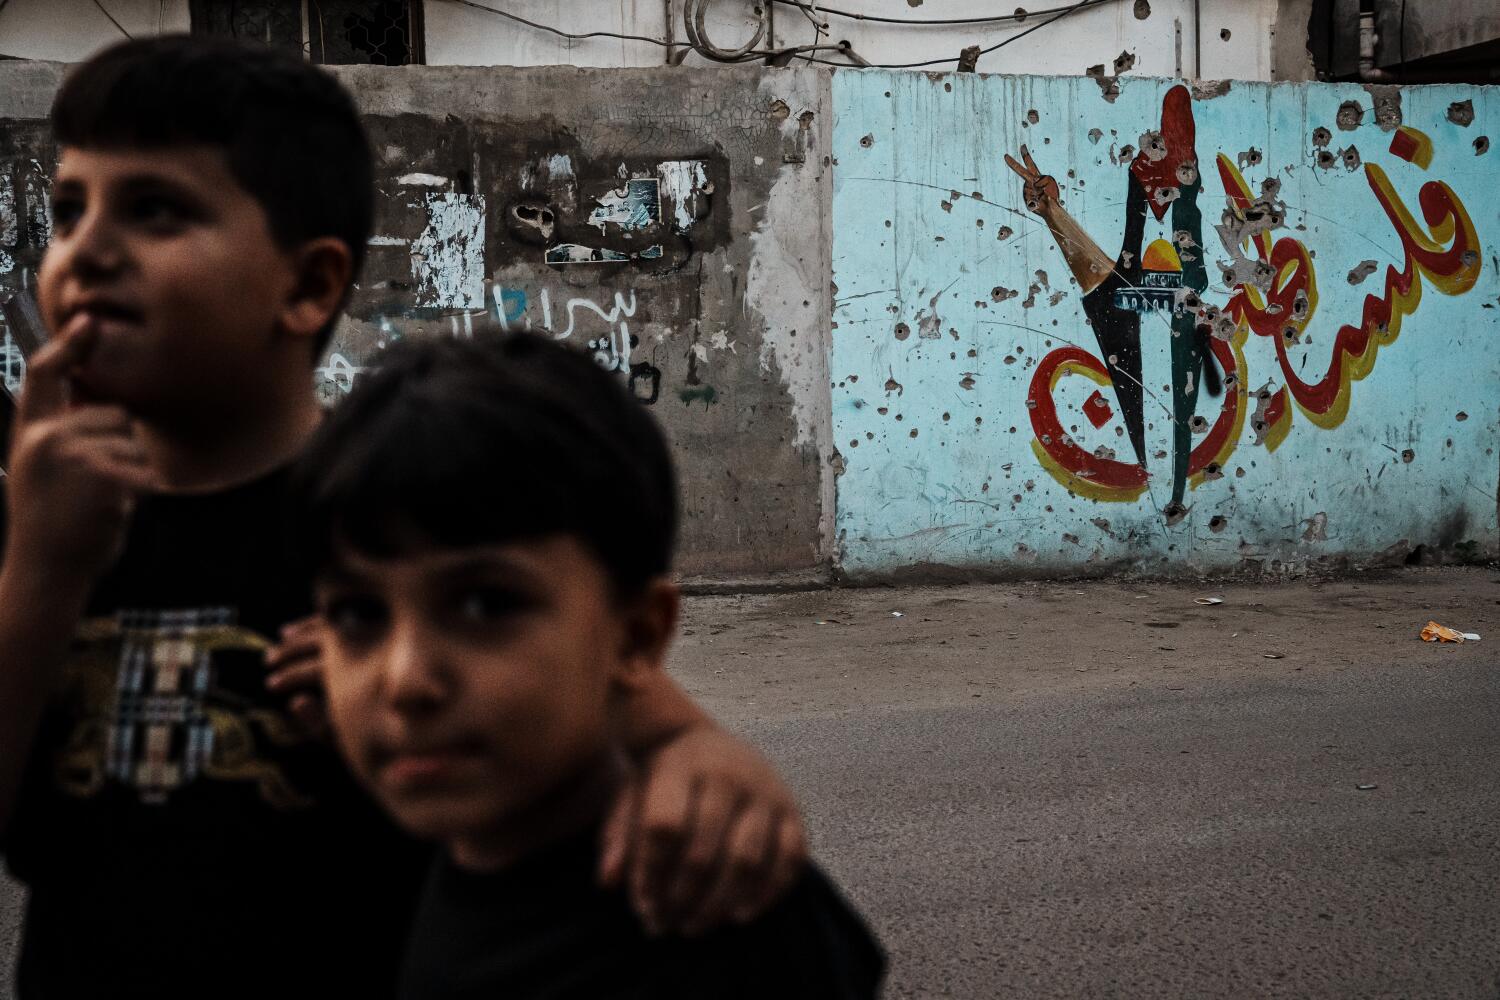 Opinion: Palestinian and Israeli children are endangered by 'us vs. them' narratives